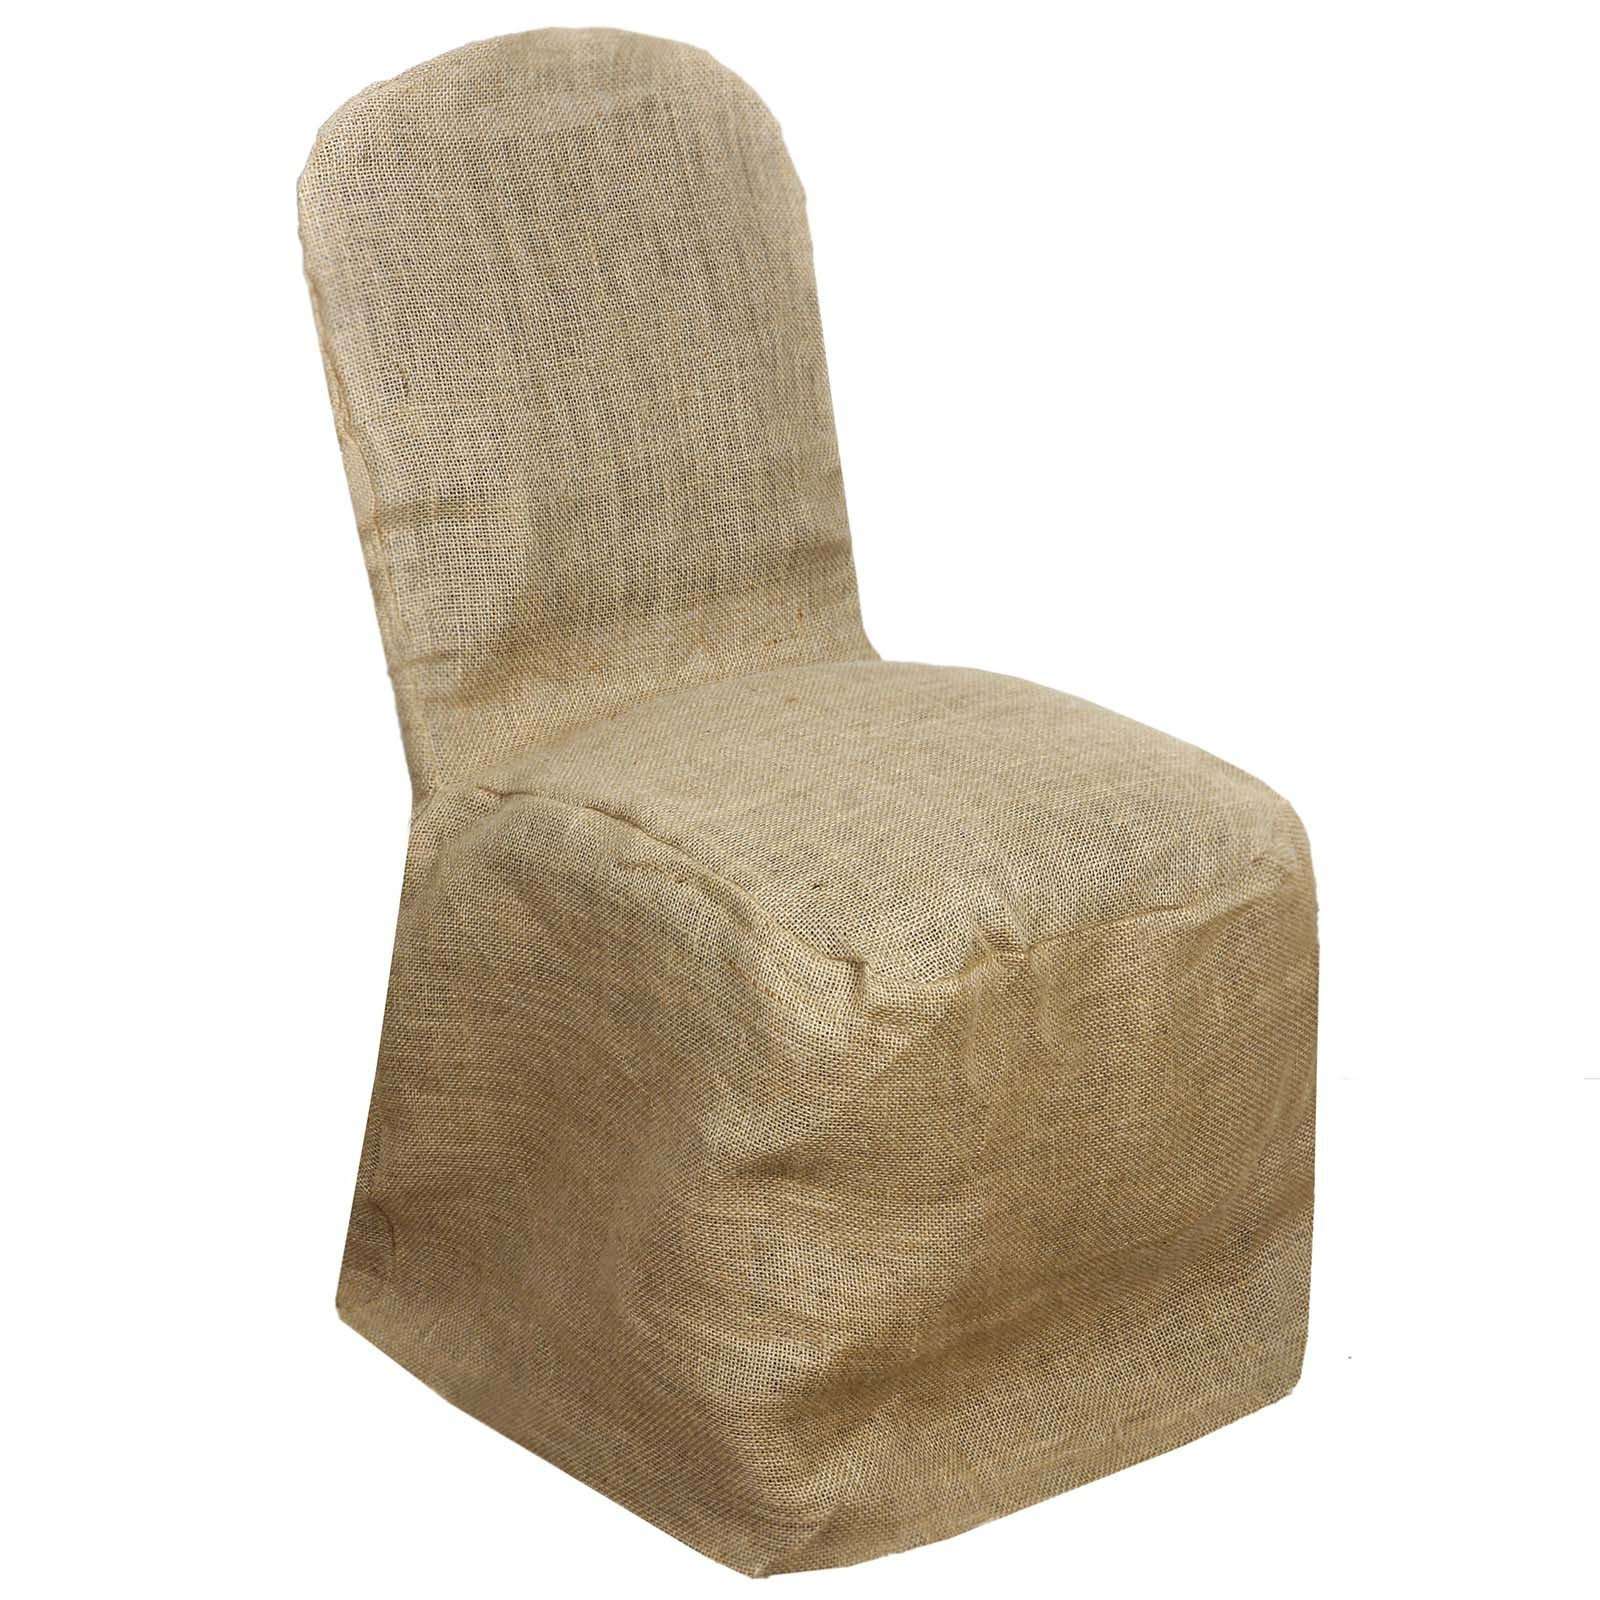 Natural Jute Burlap Banquet Chair Cover For Catering Wedding Party